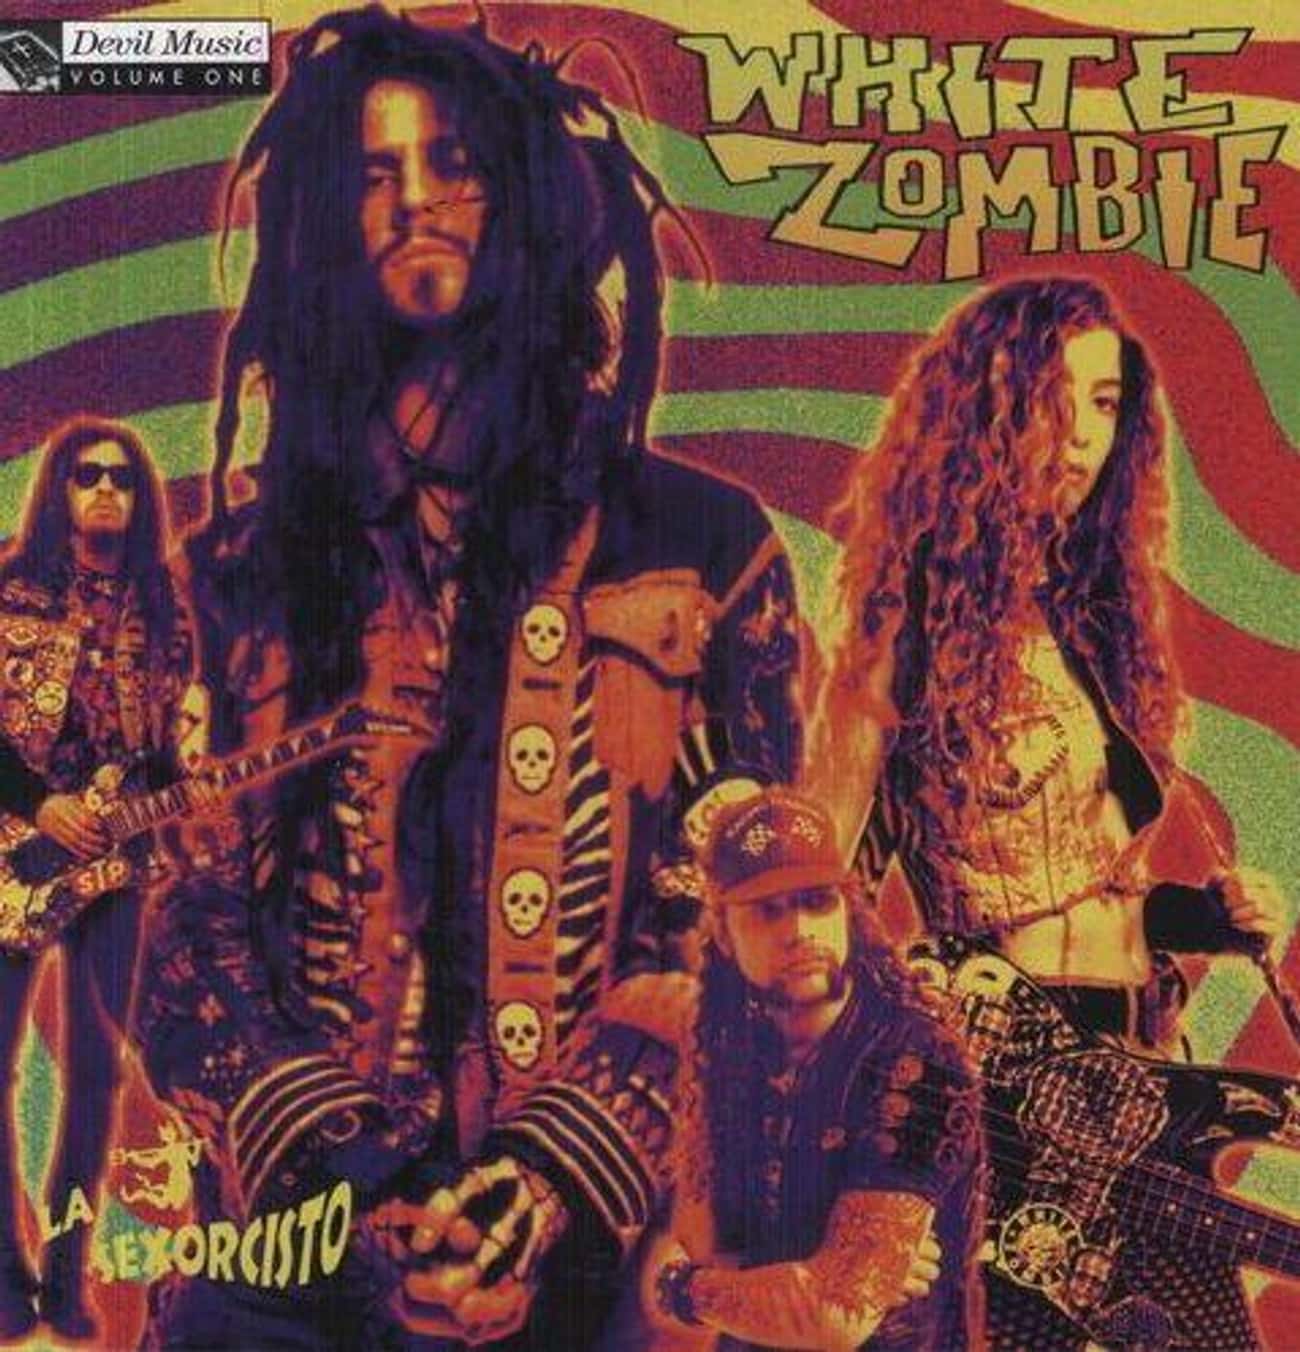 1992: Manson Nabbed His First White Zombie Record